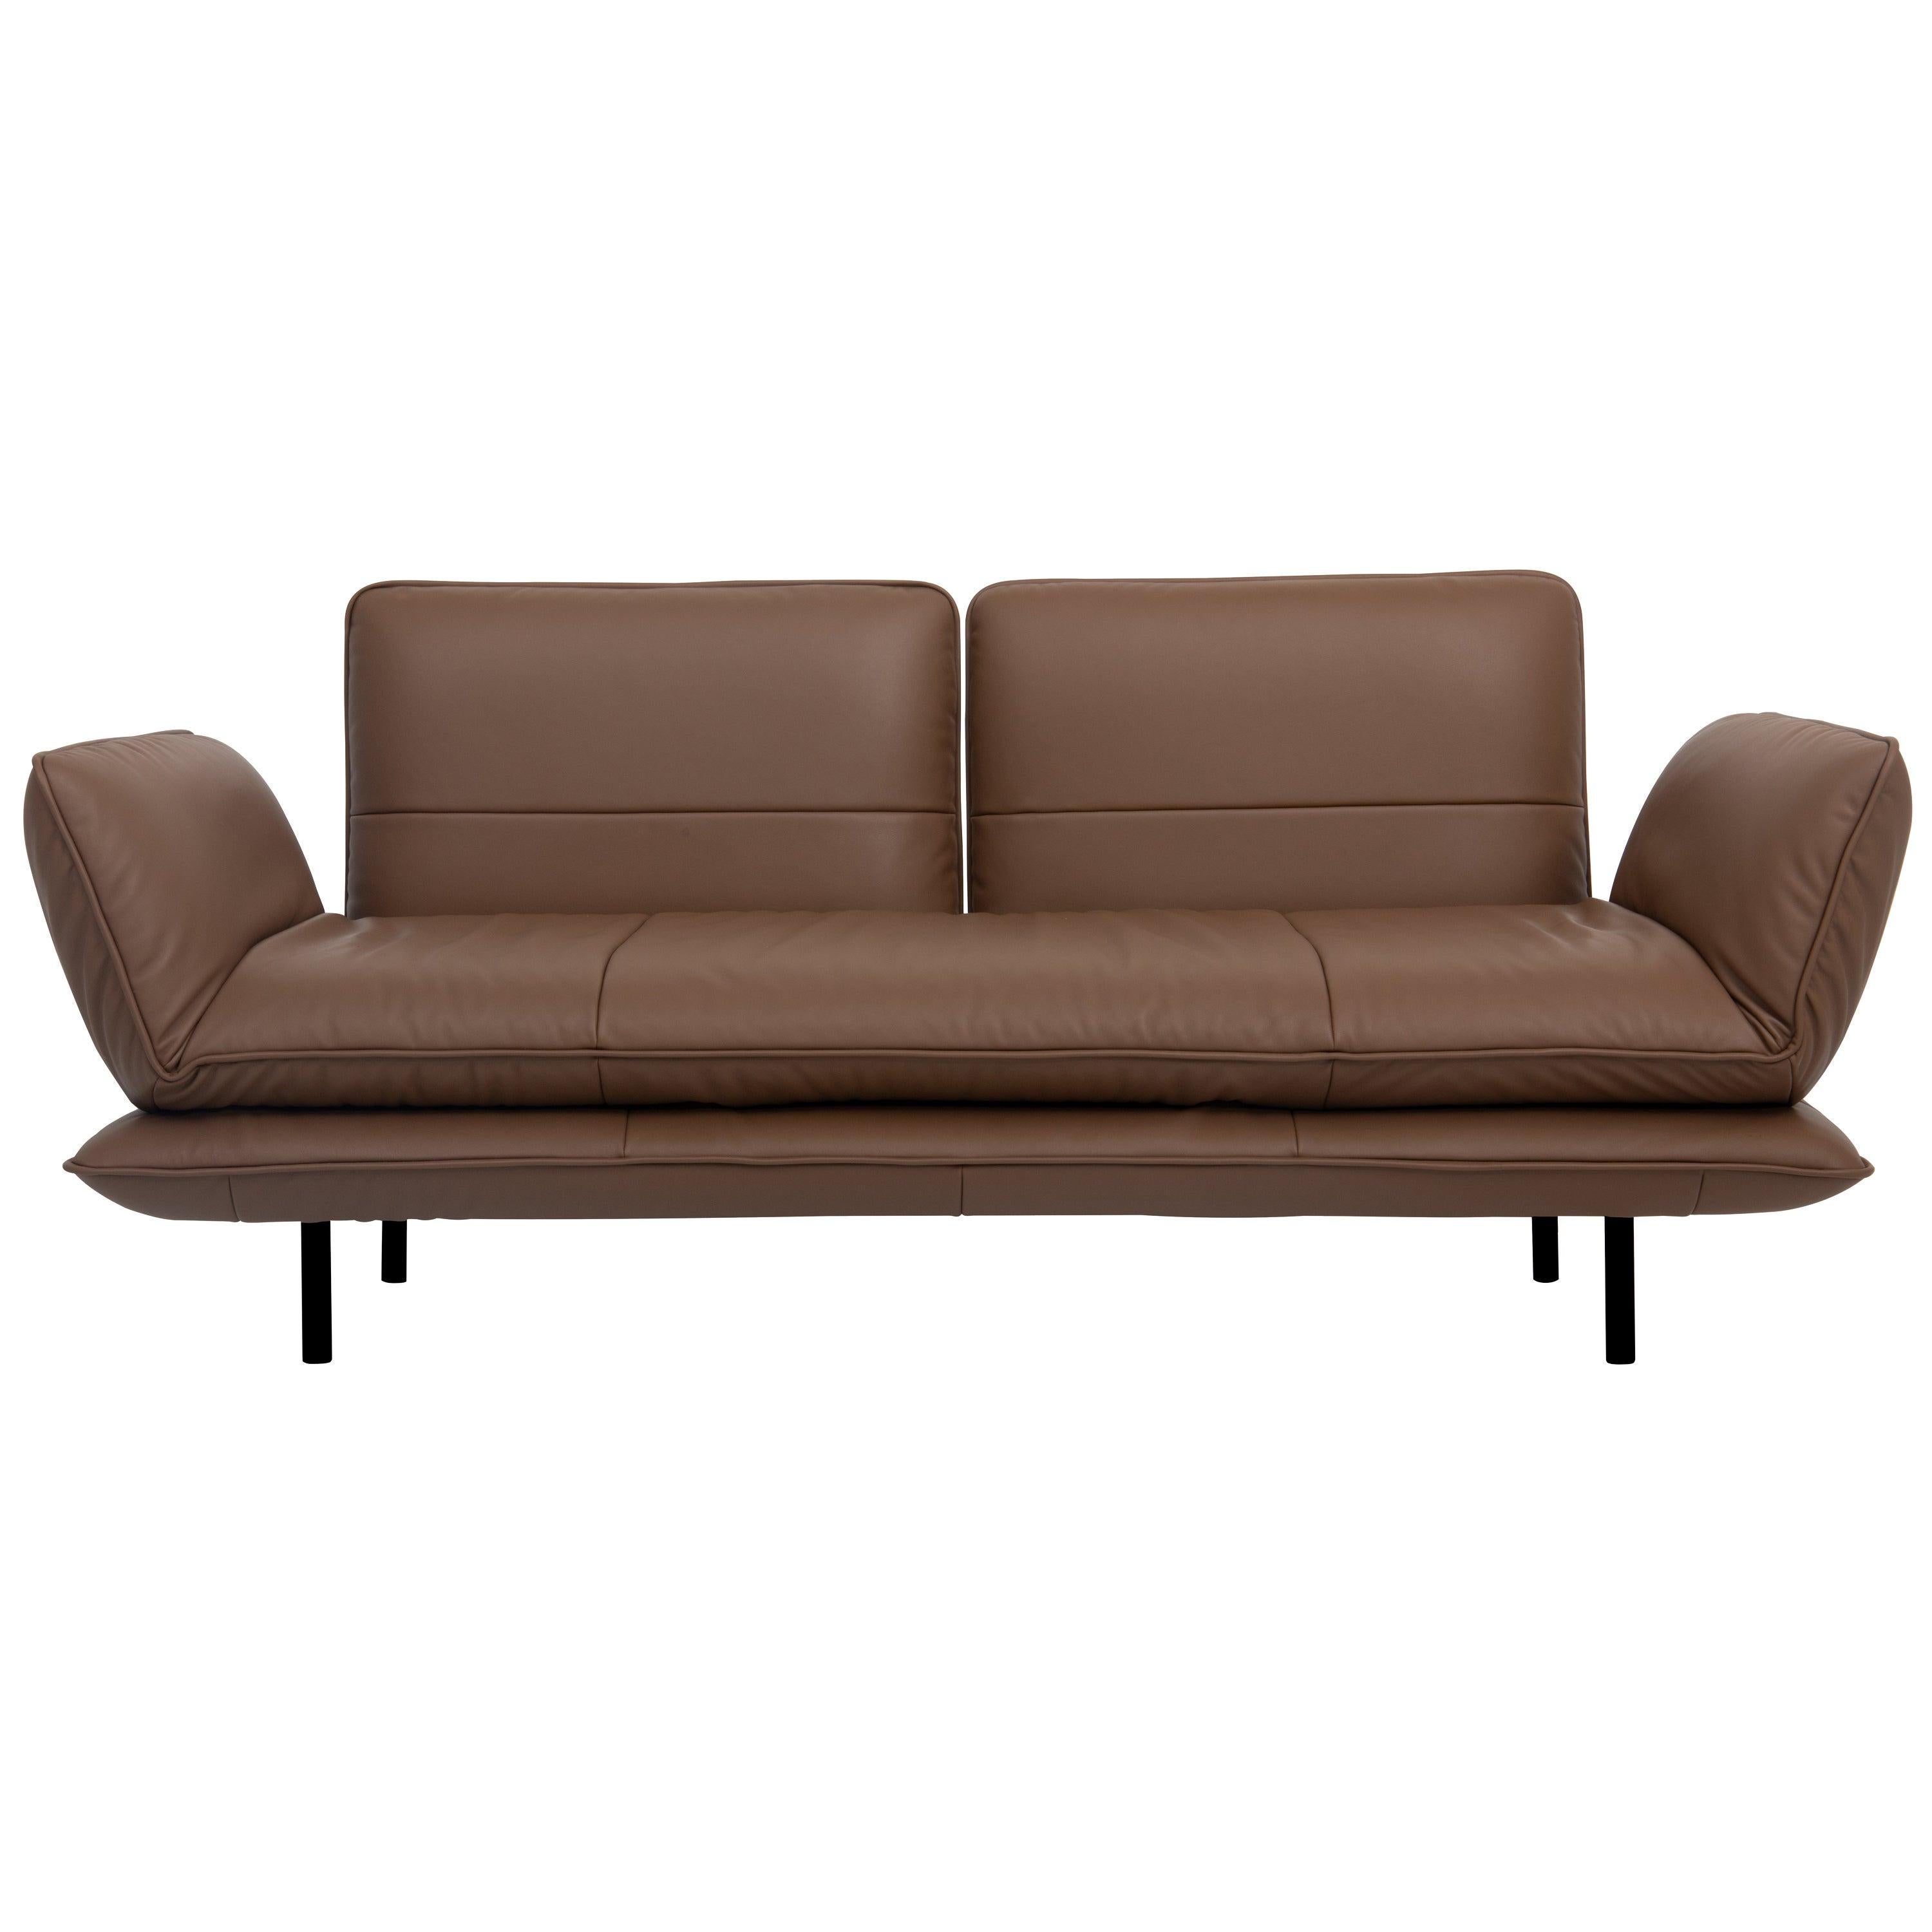 Juna Convertible Leather Sofa by FSM